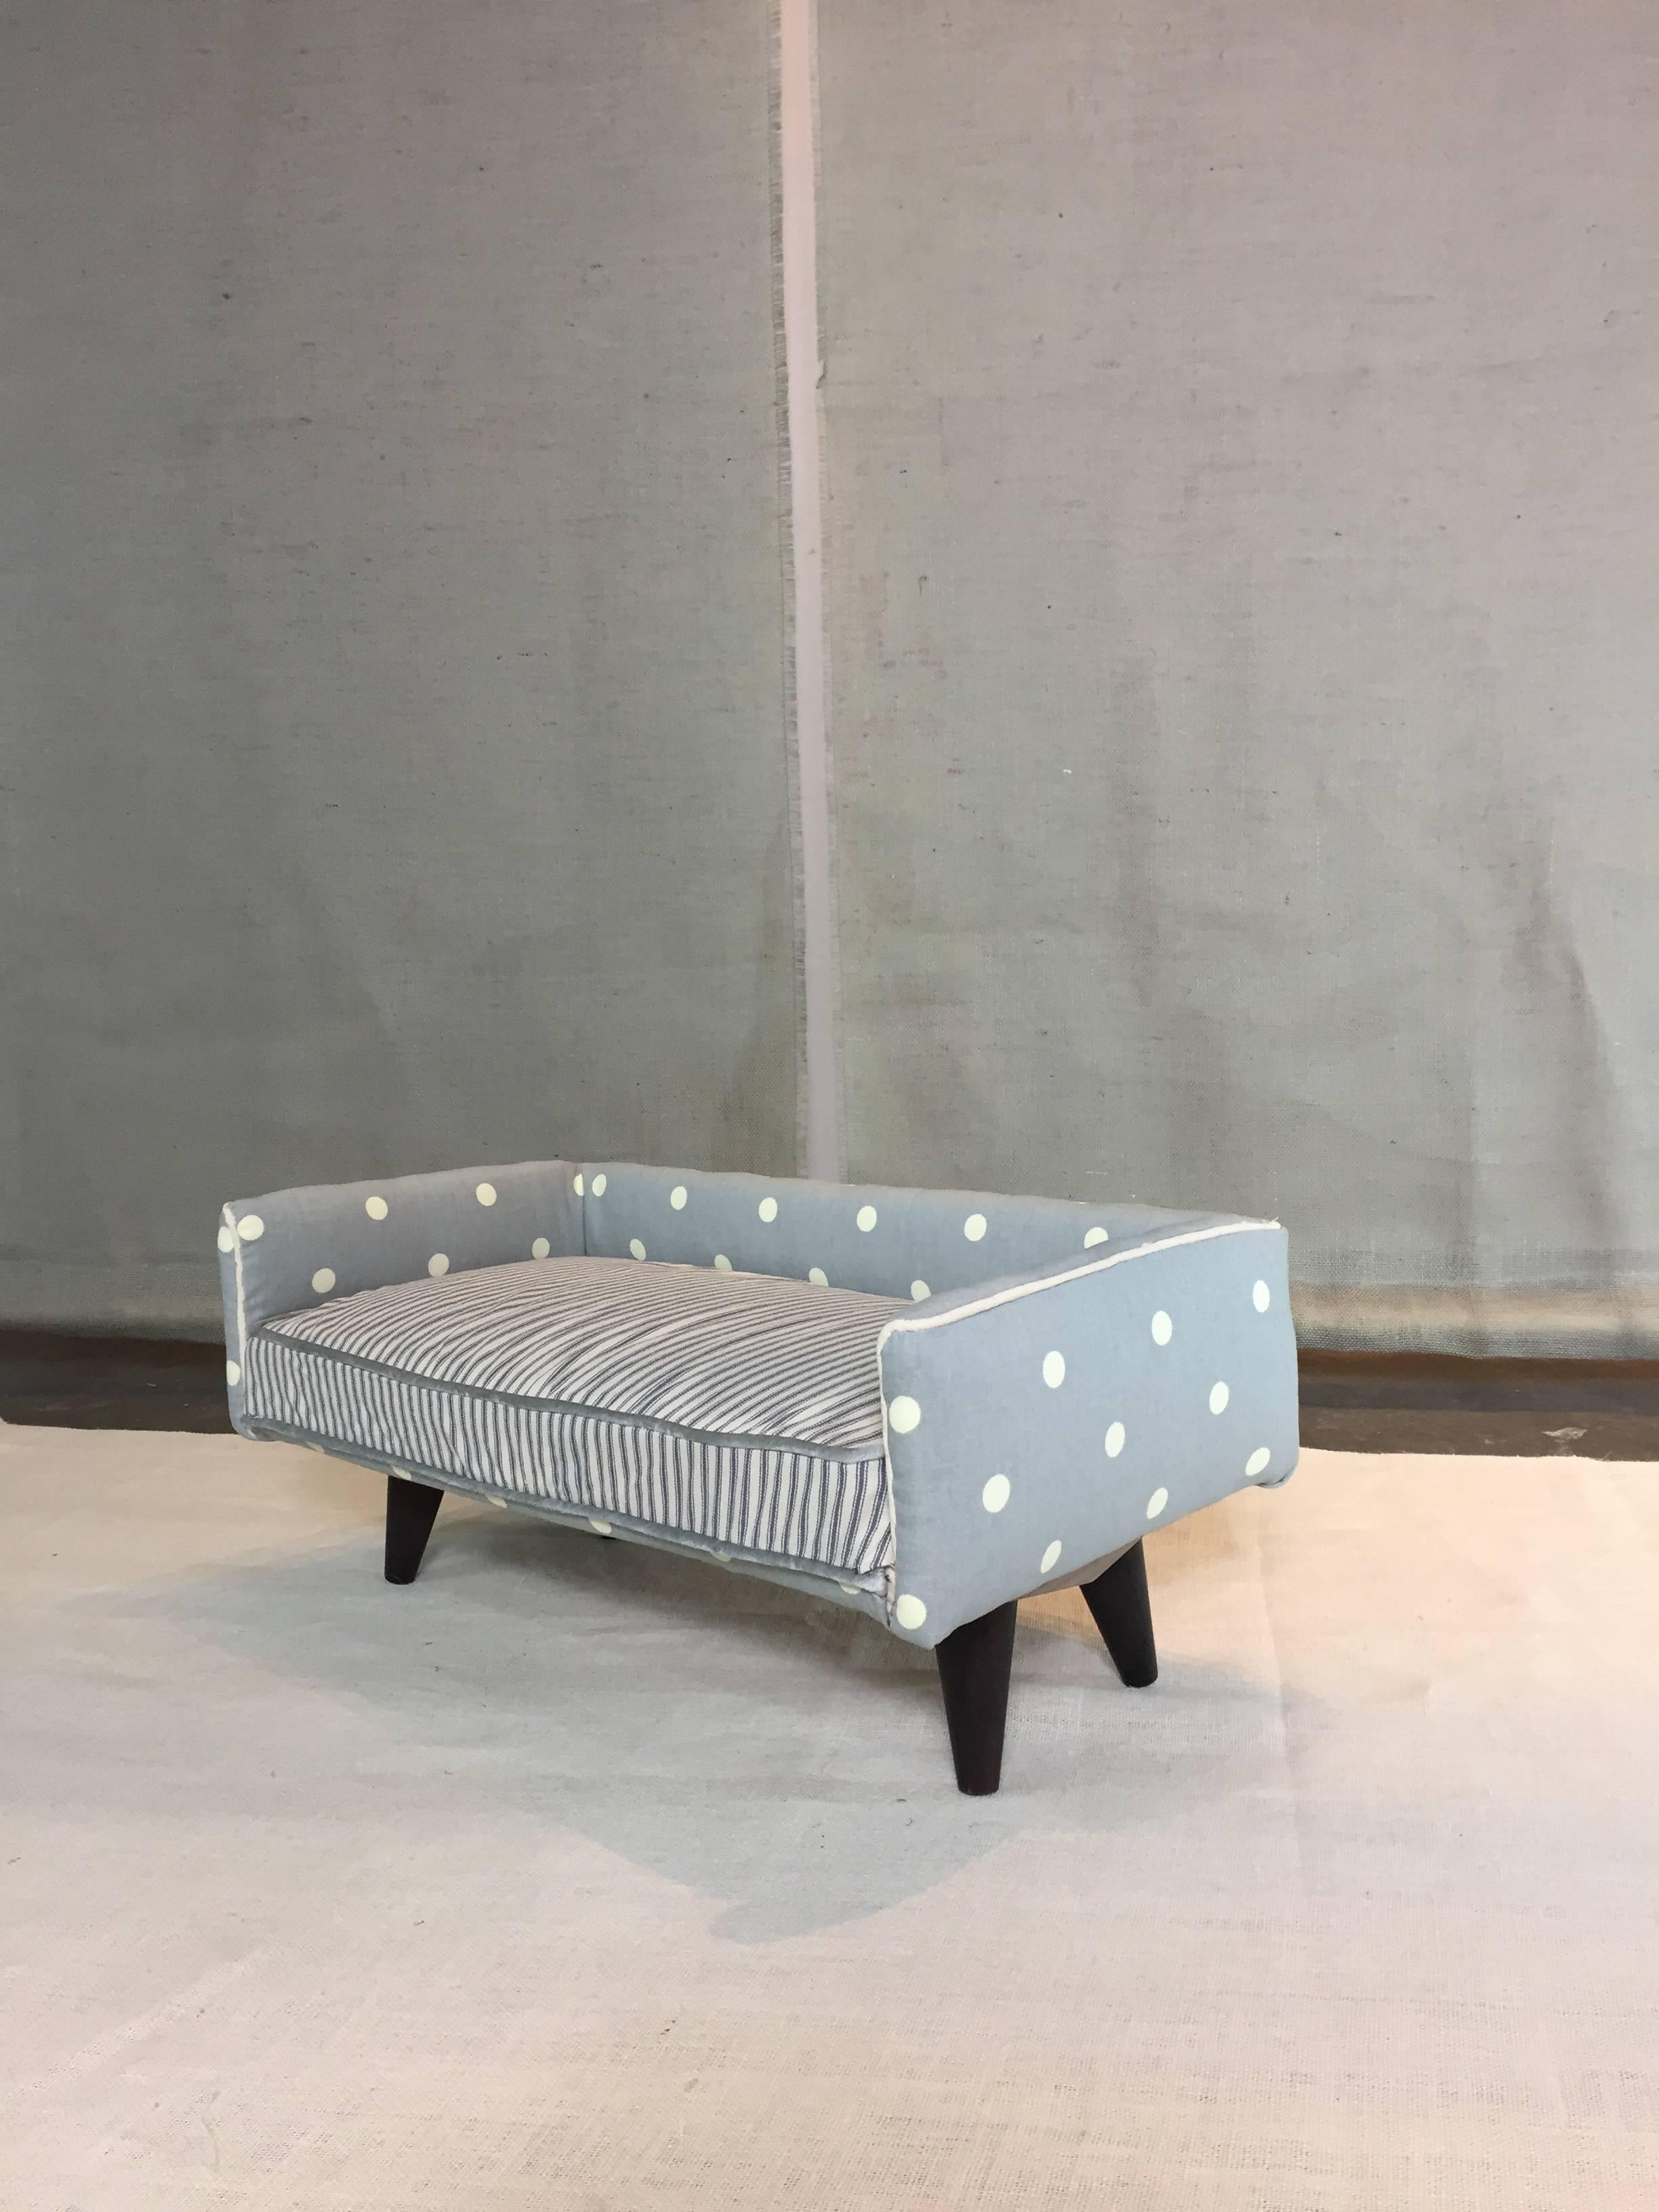 Contemporary Midcentury Dogbed in Sky-Blue Polka Dot  For Sale